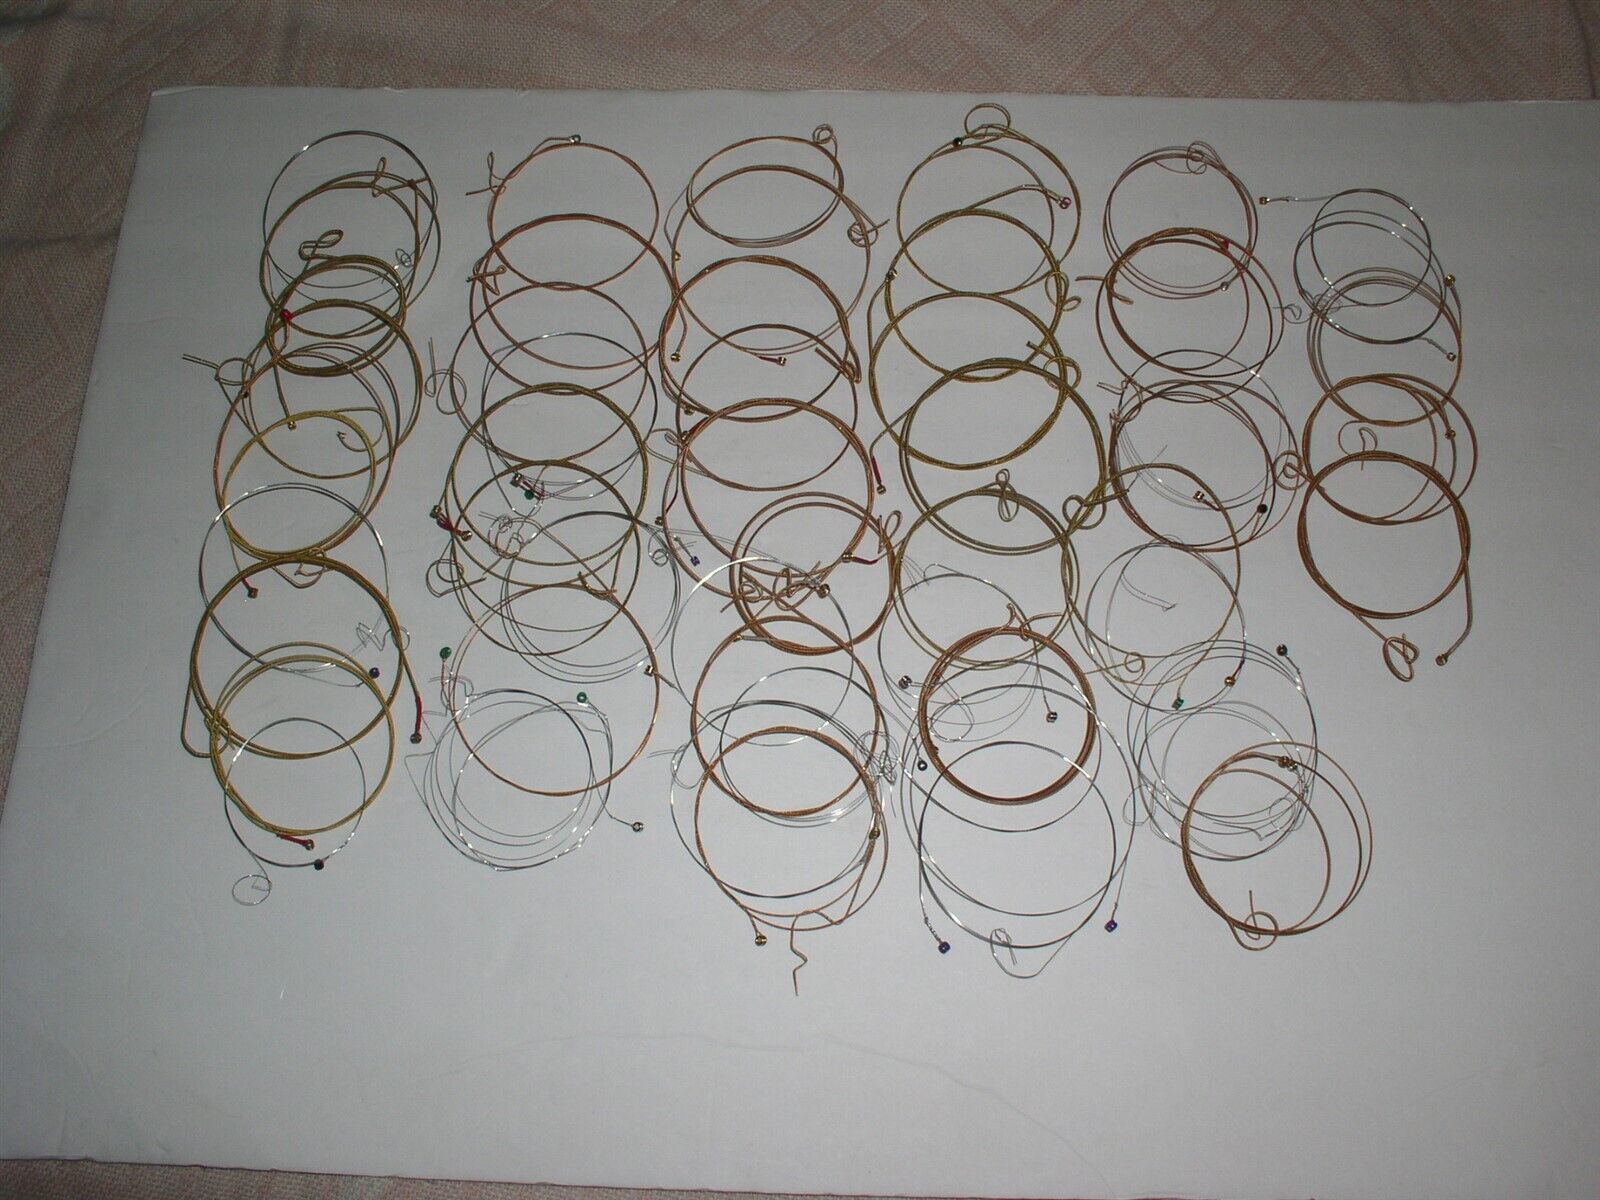 Martin Marquis Guitar String Lot Of 50 Used Assortment D'Addario Jewelry Wire - $22.99